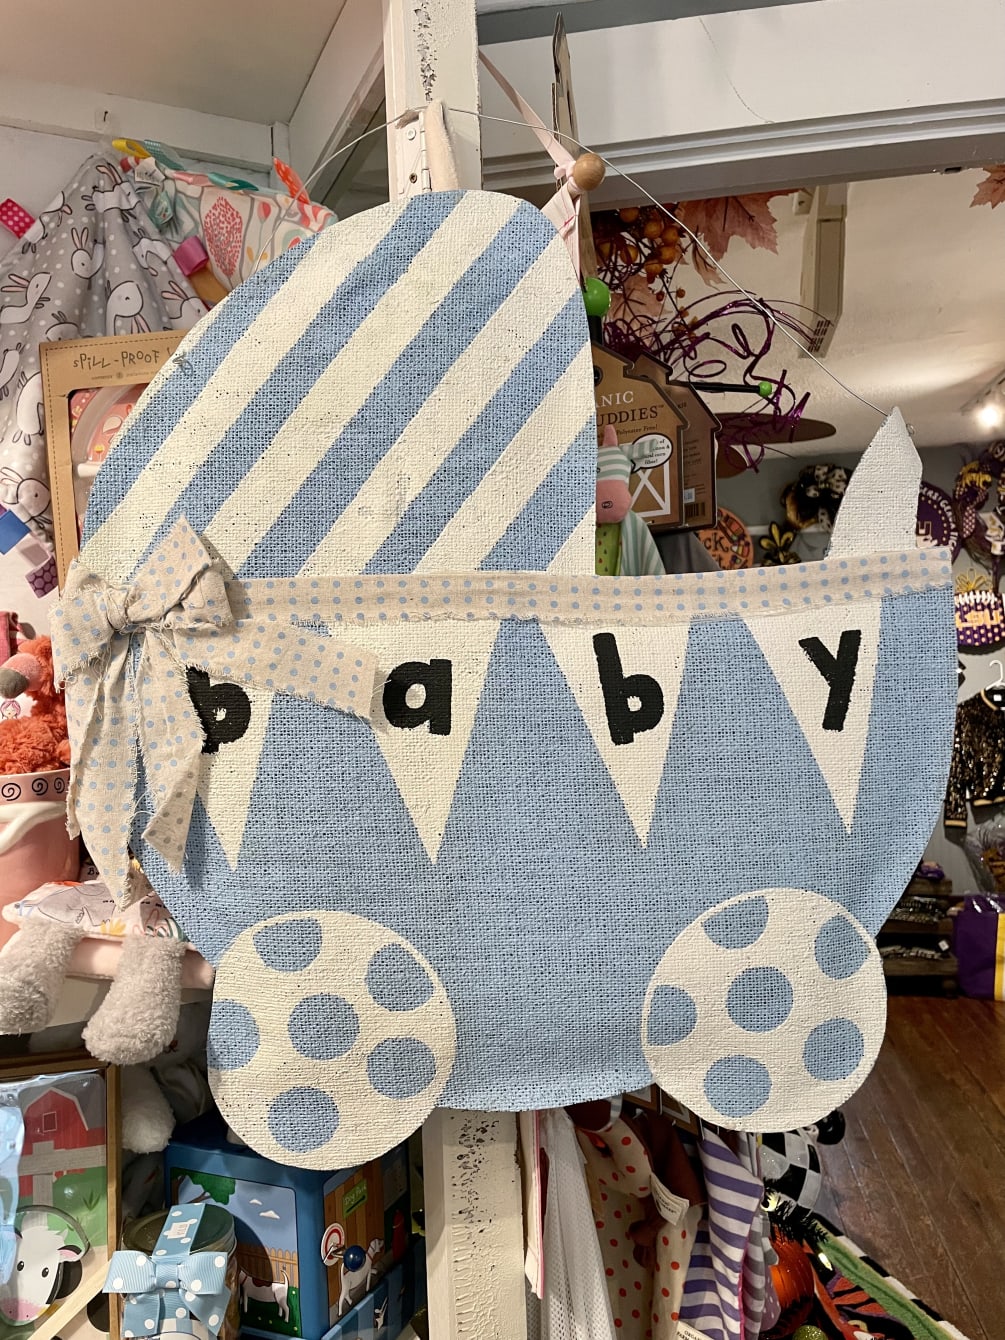 Fantastic display to spread the news of your new little guy! 